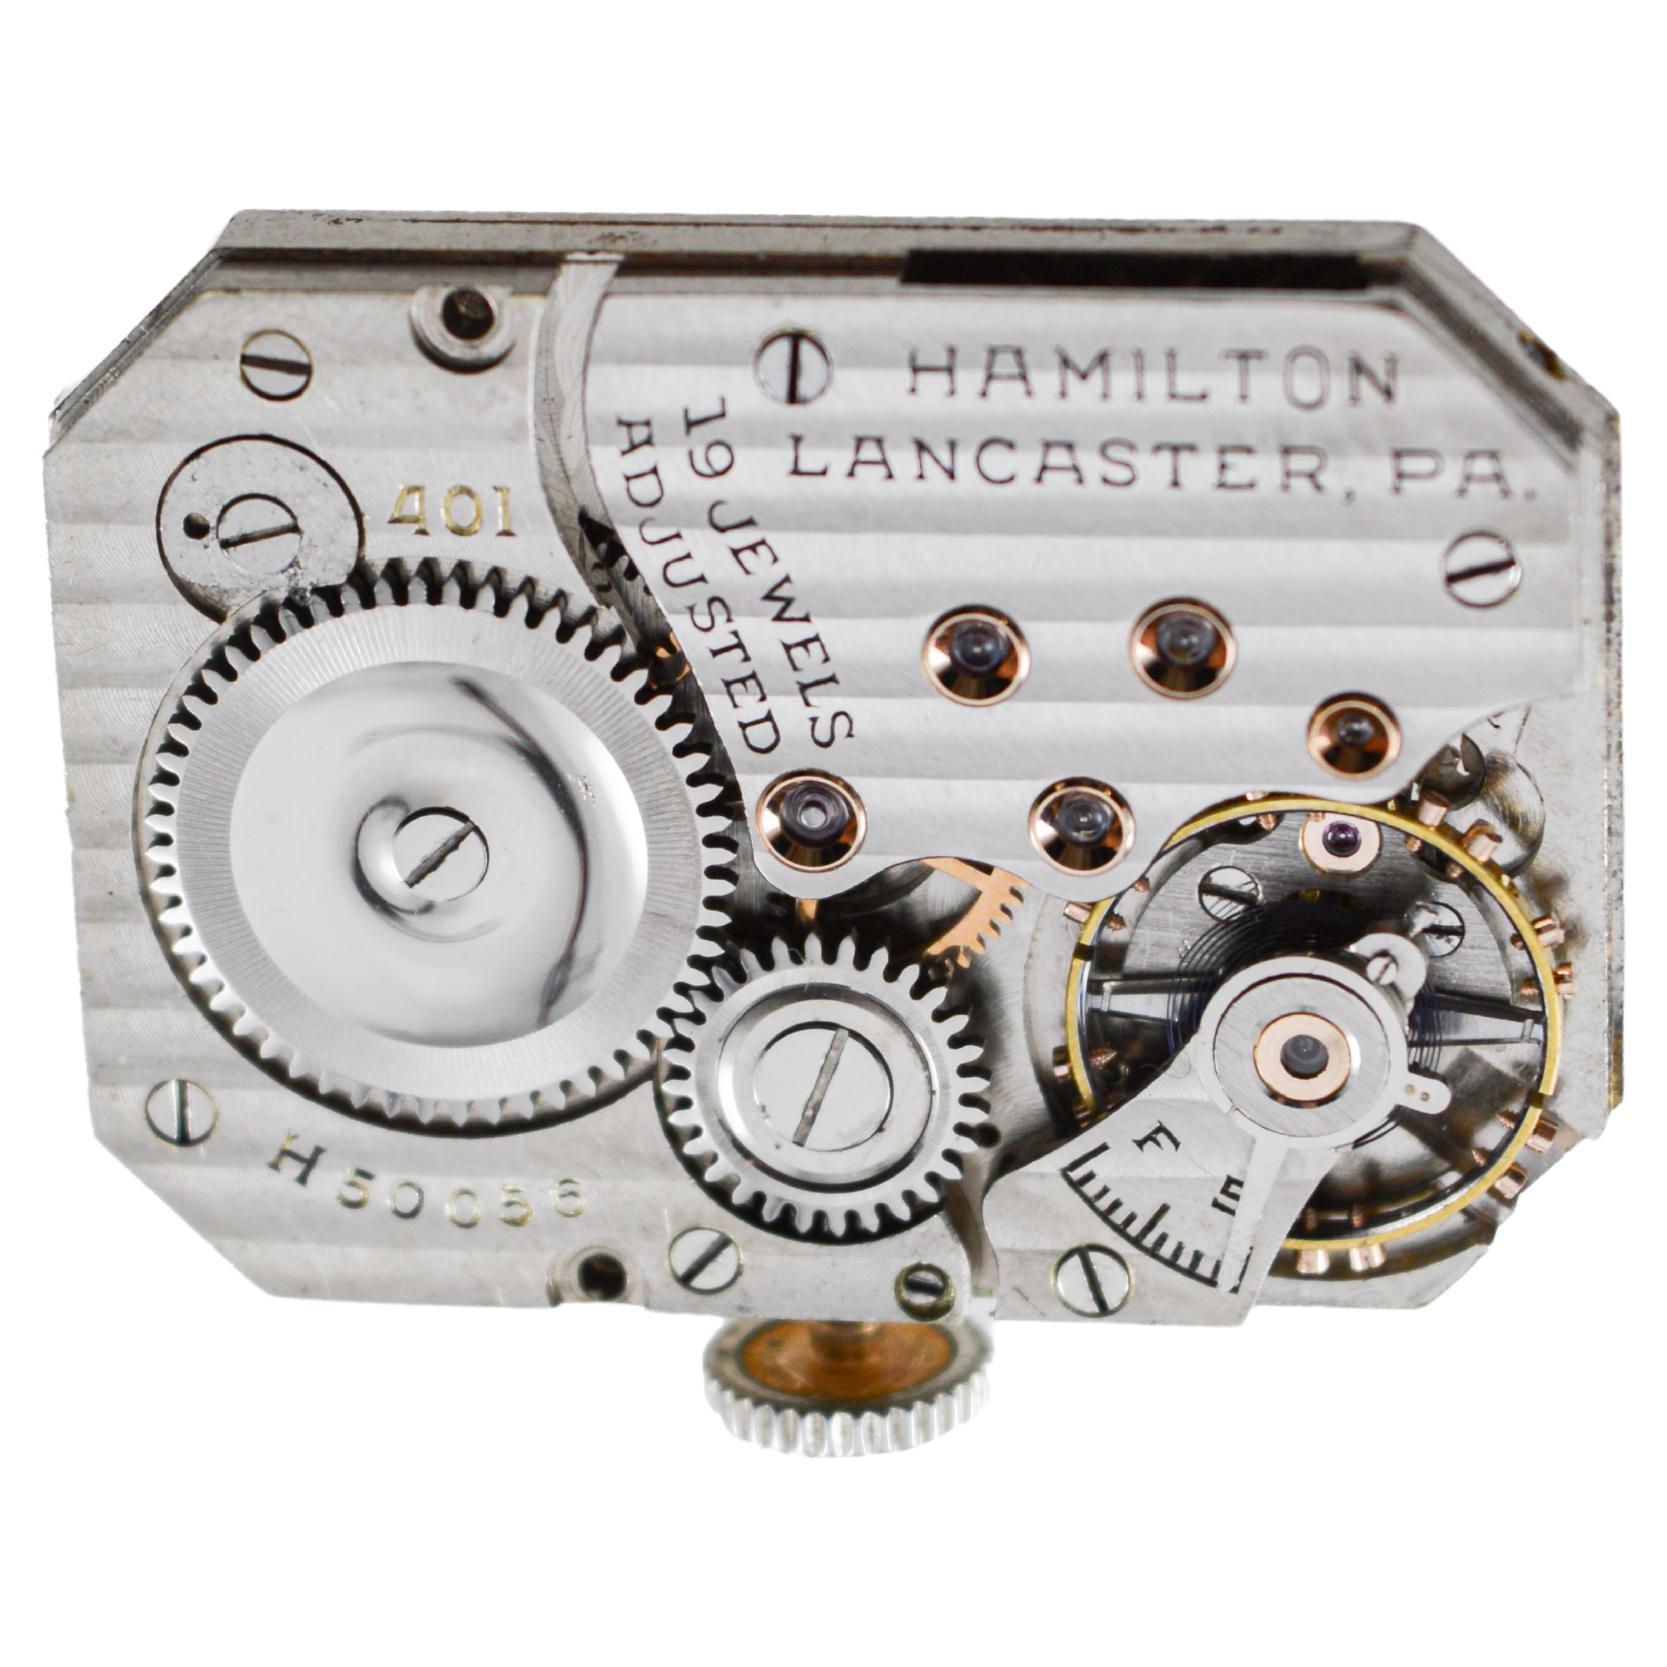 Hamilton 14K Solid White Gold Art Deco Watch with Presentation Back from 1932 For Sale 16